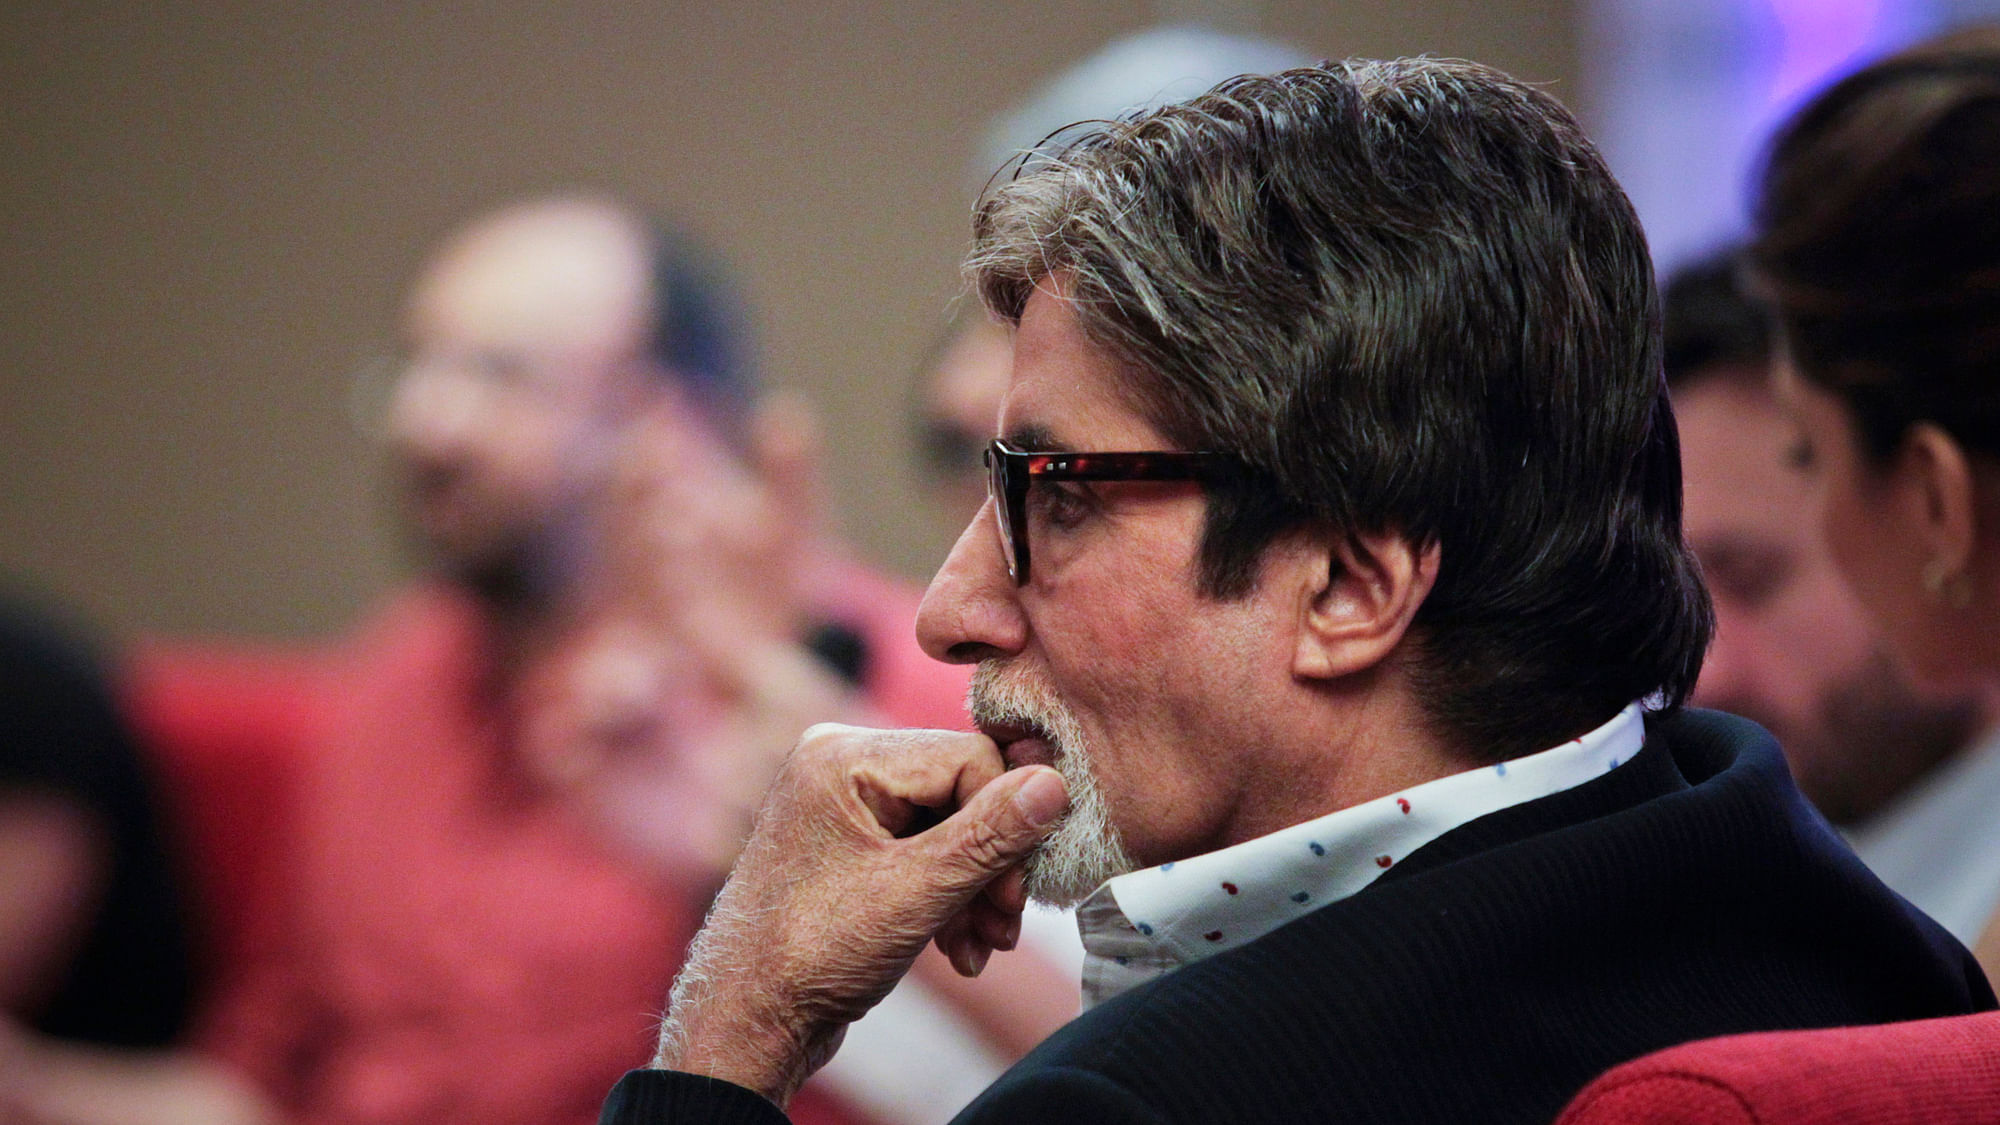 

After representing LG, Sr Bachchan will now be seen as part of OnePlus. (Photo: Reuters)